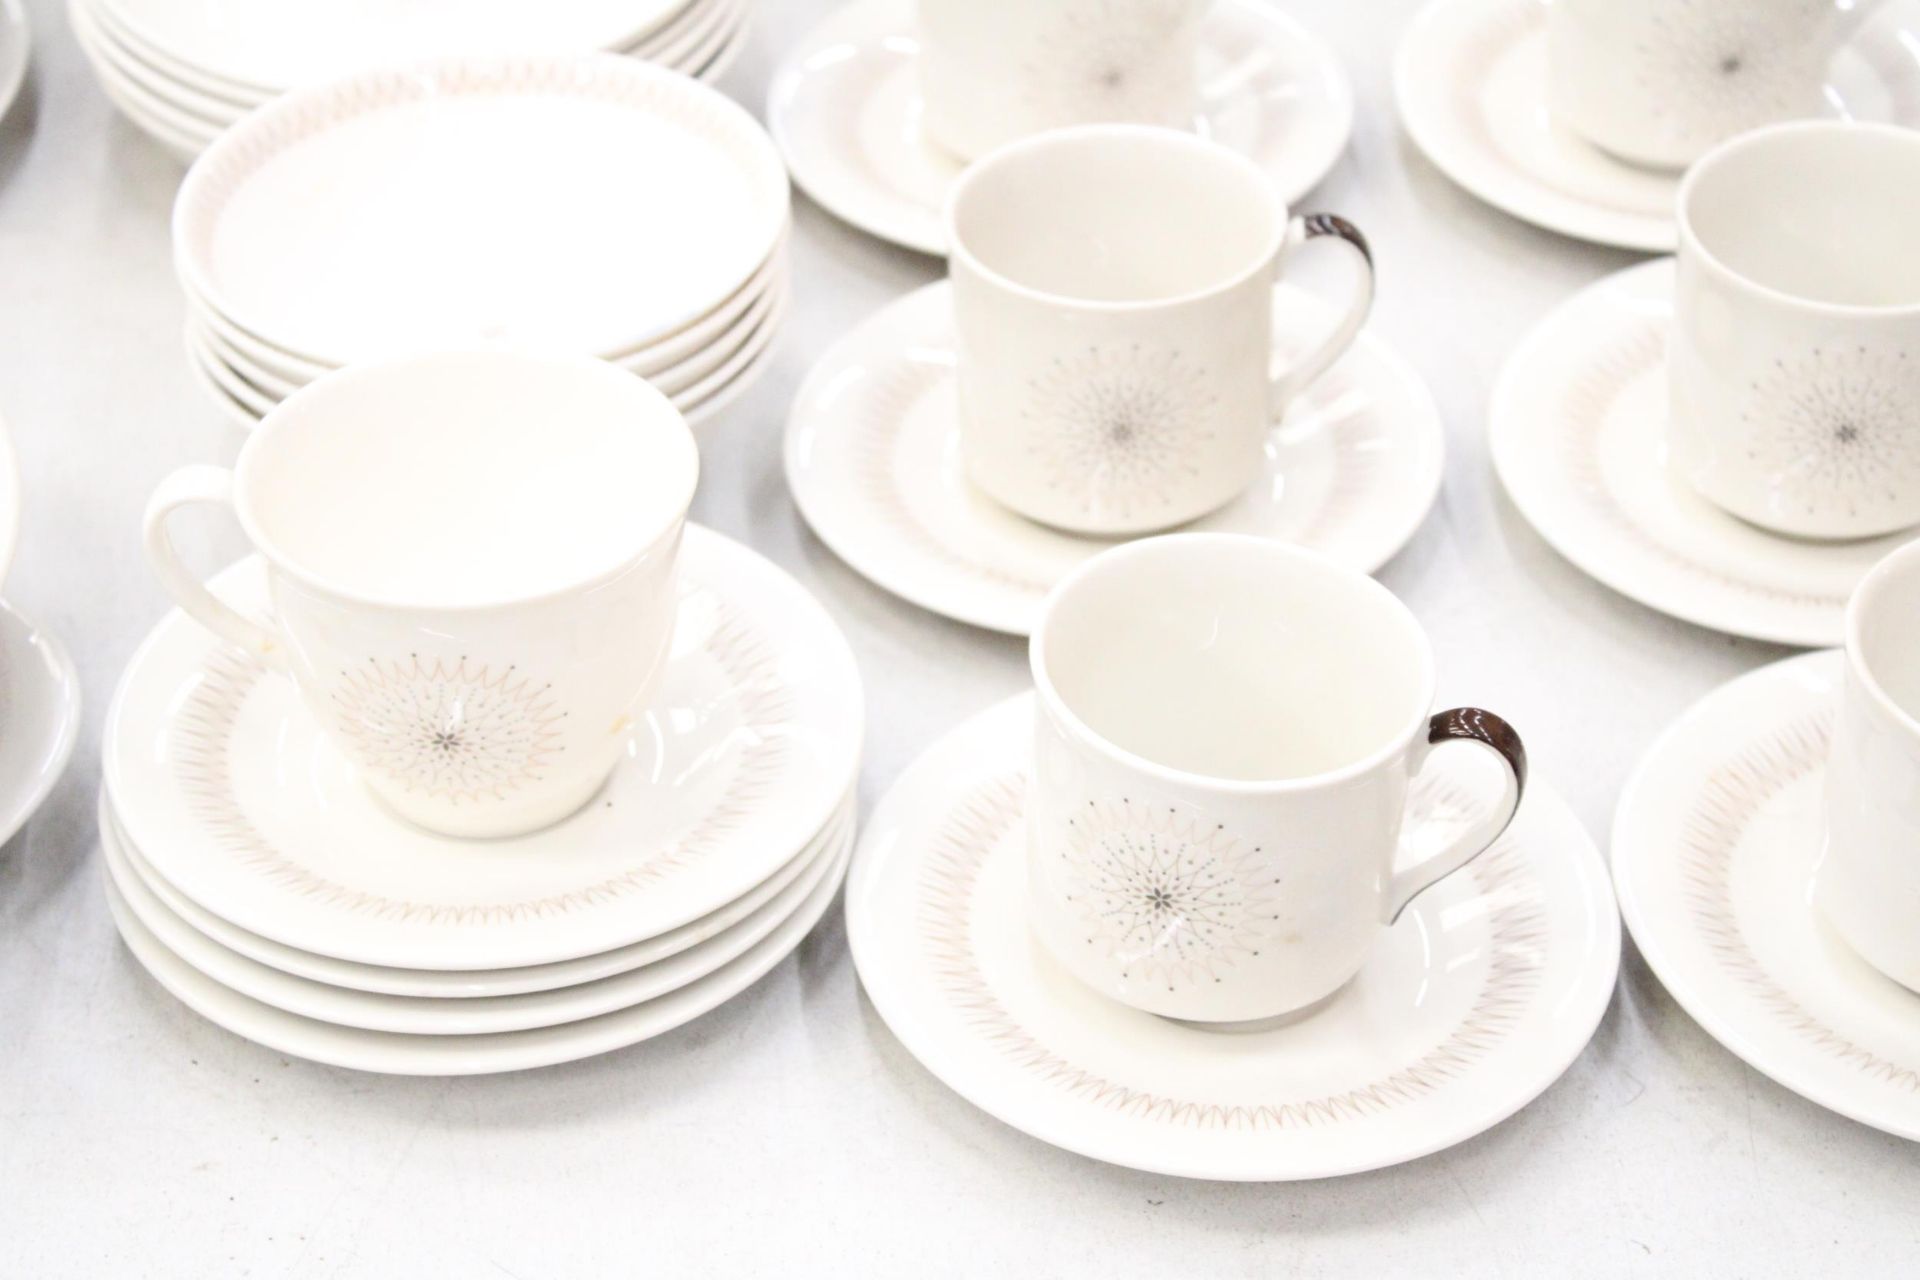 A LARGE ROYAL DOULTON "MORNING STAR" DINNER SERVICE TO INCLUDE CUPS, SAUCERS, PLATES, TEA POT, JUG - Image 3 of 6